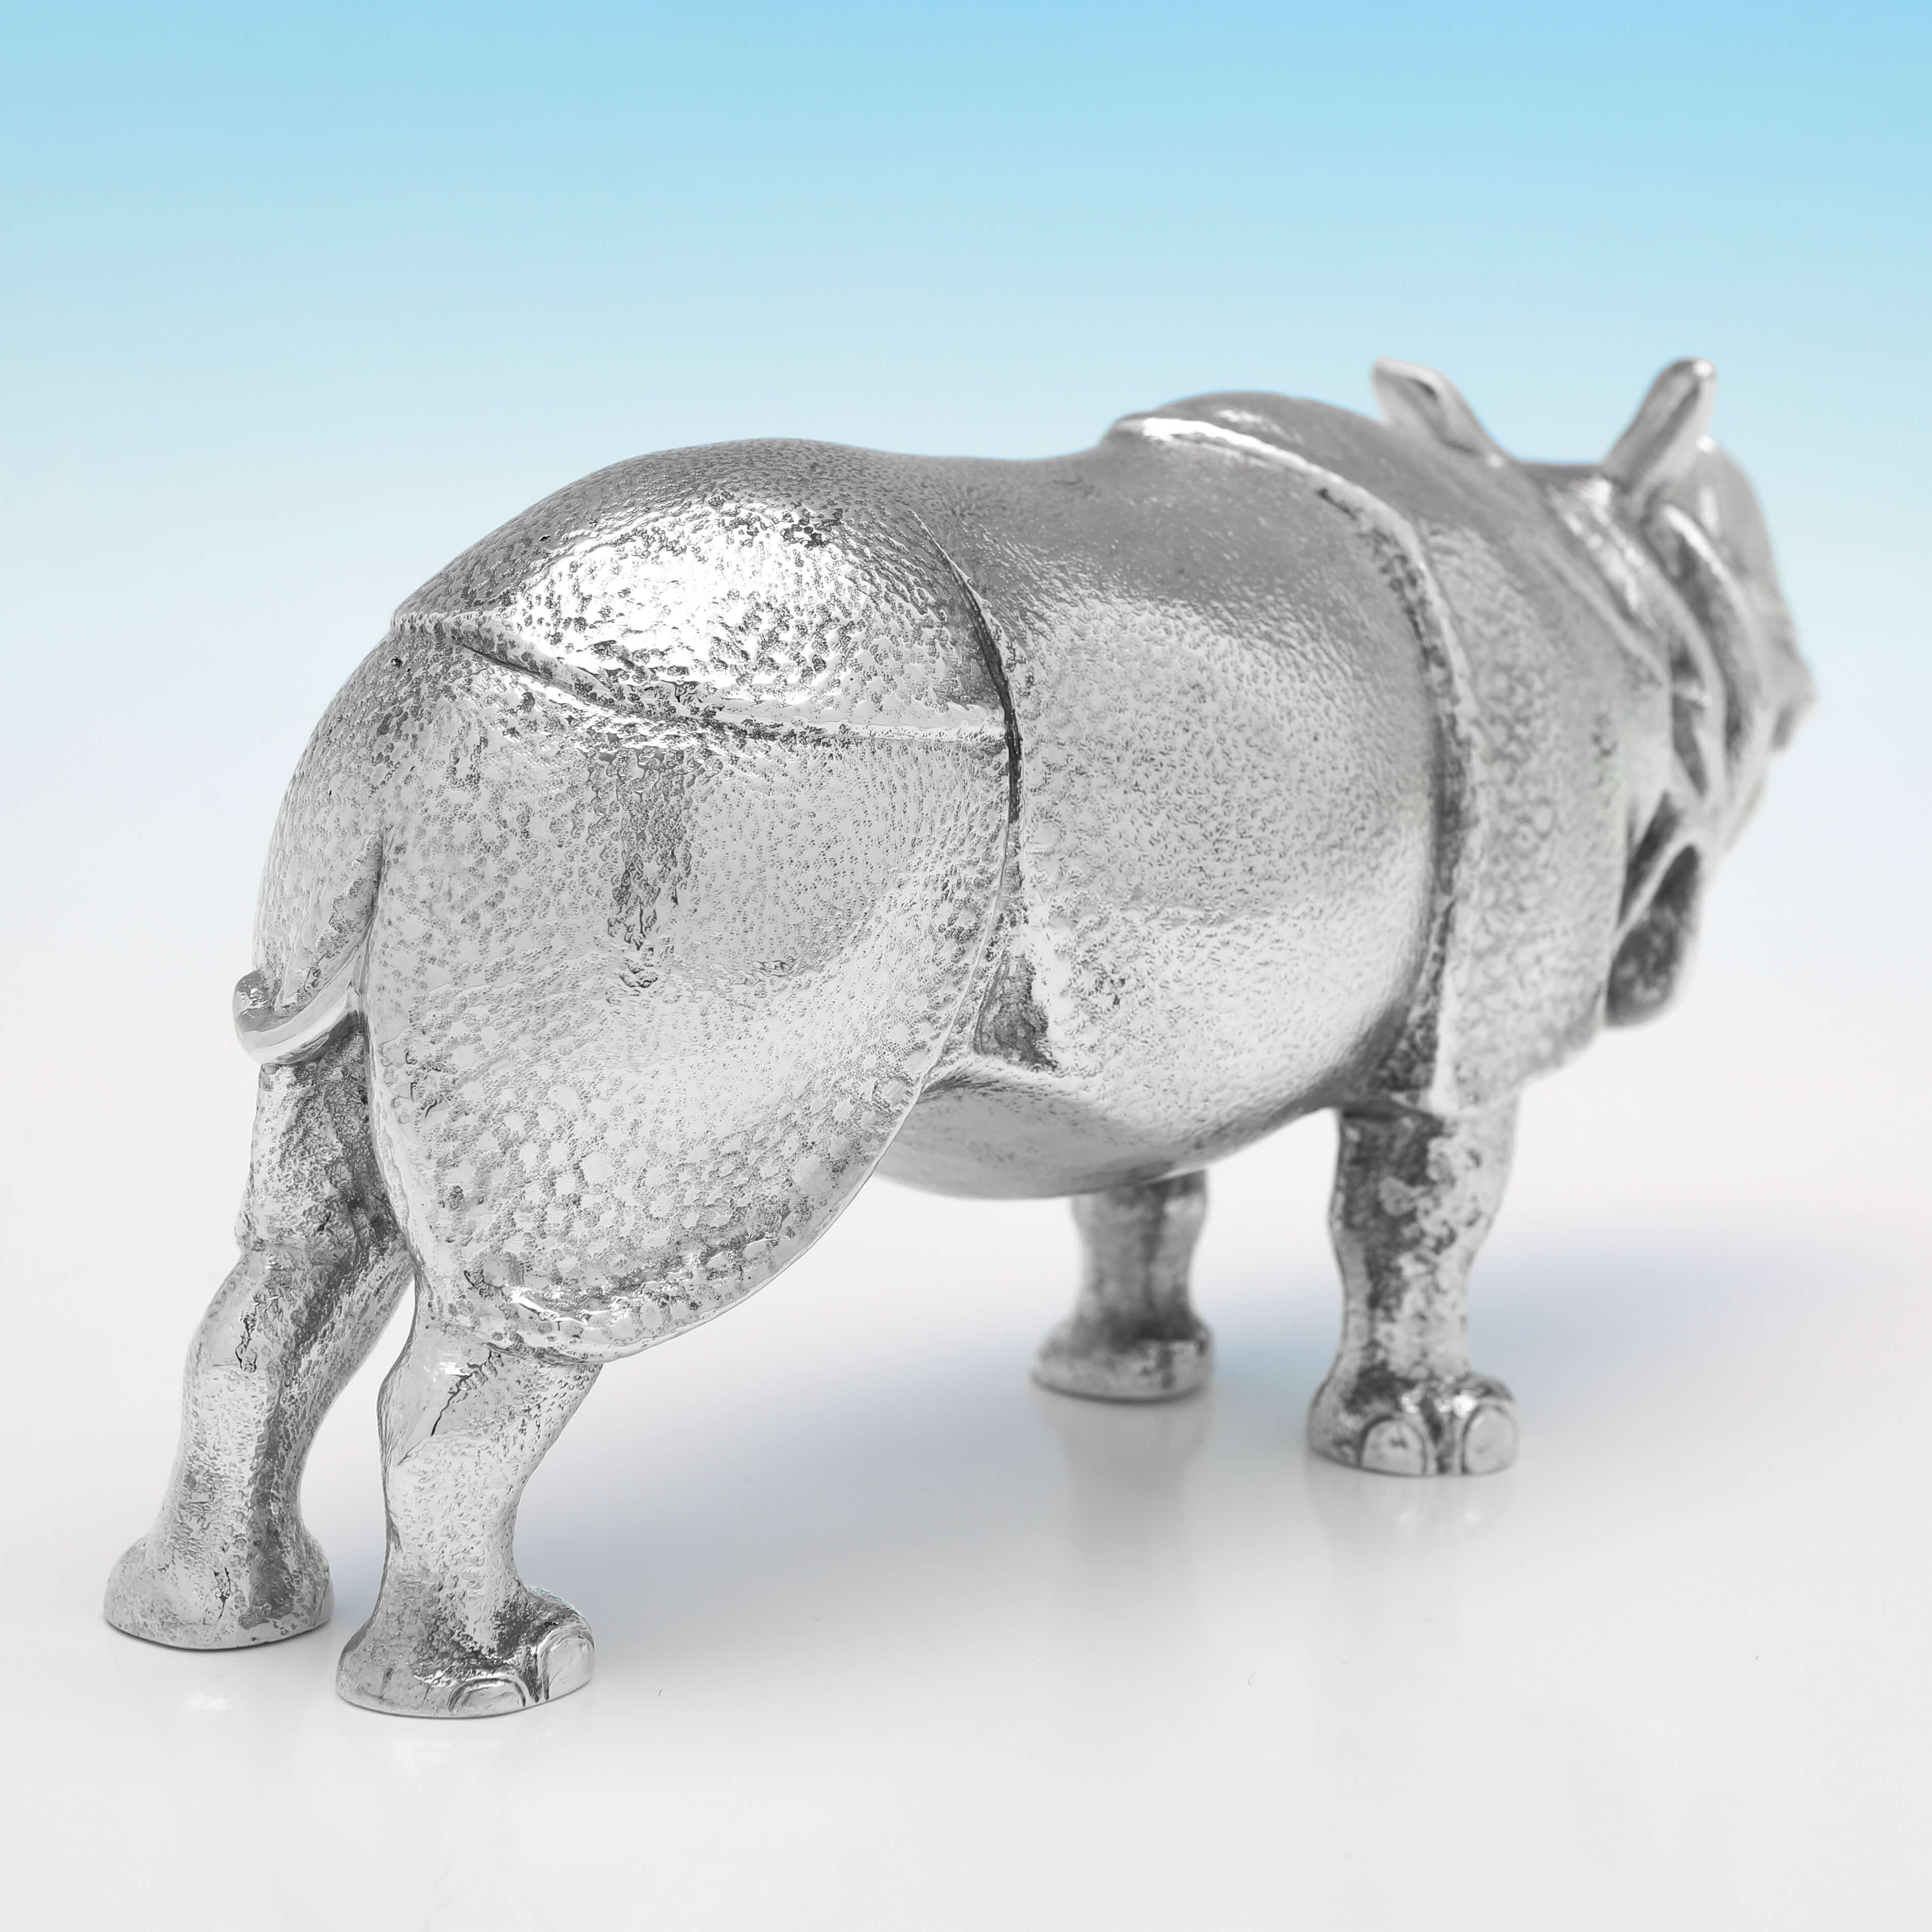 Edwardian Very Rare Antique Sterling Silver Rhinoceros Model - Hallmarked in 1906 For Sale